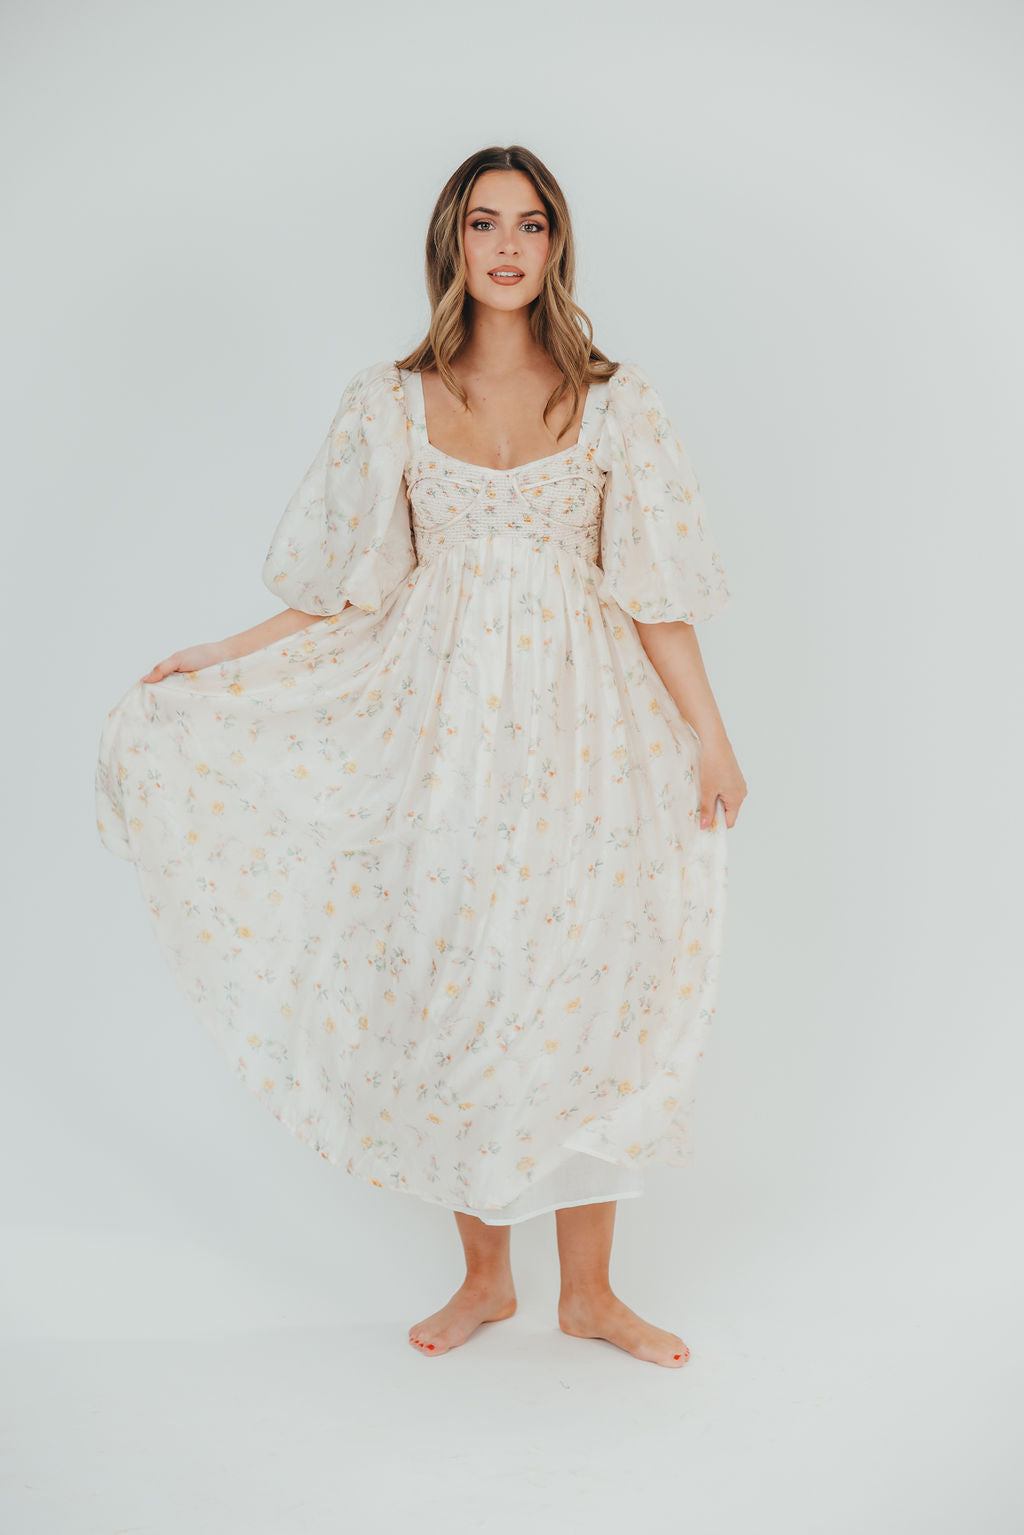 Harlow Maxi Dress in Tiny Yellow Floral - Bump Friendly & Inclusive Sizing (S-3XL)